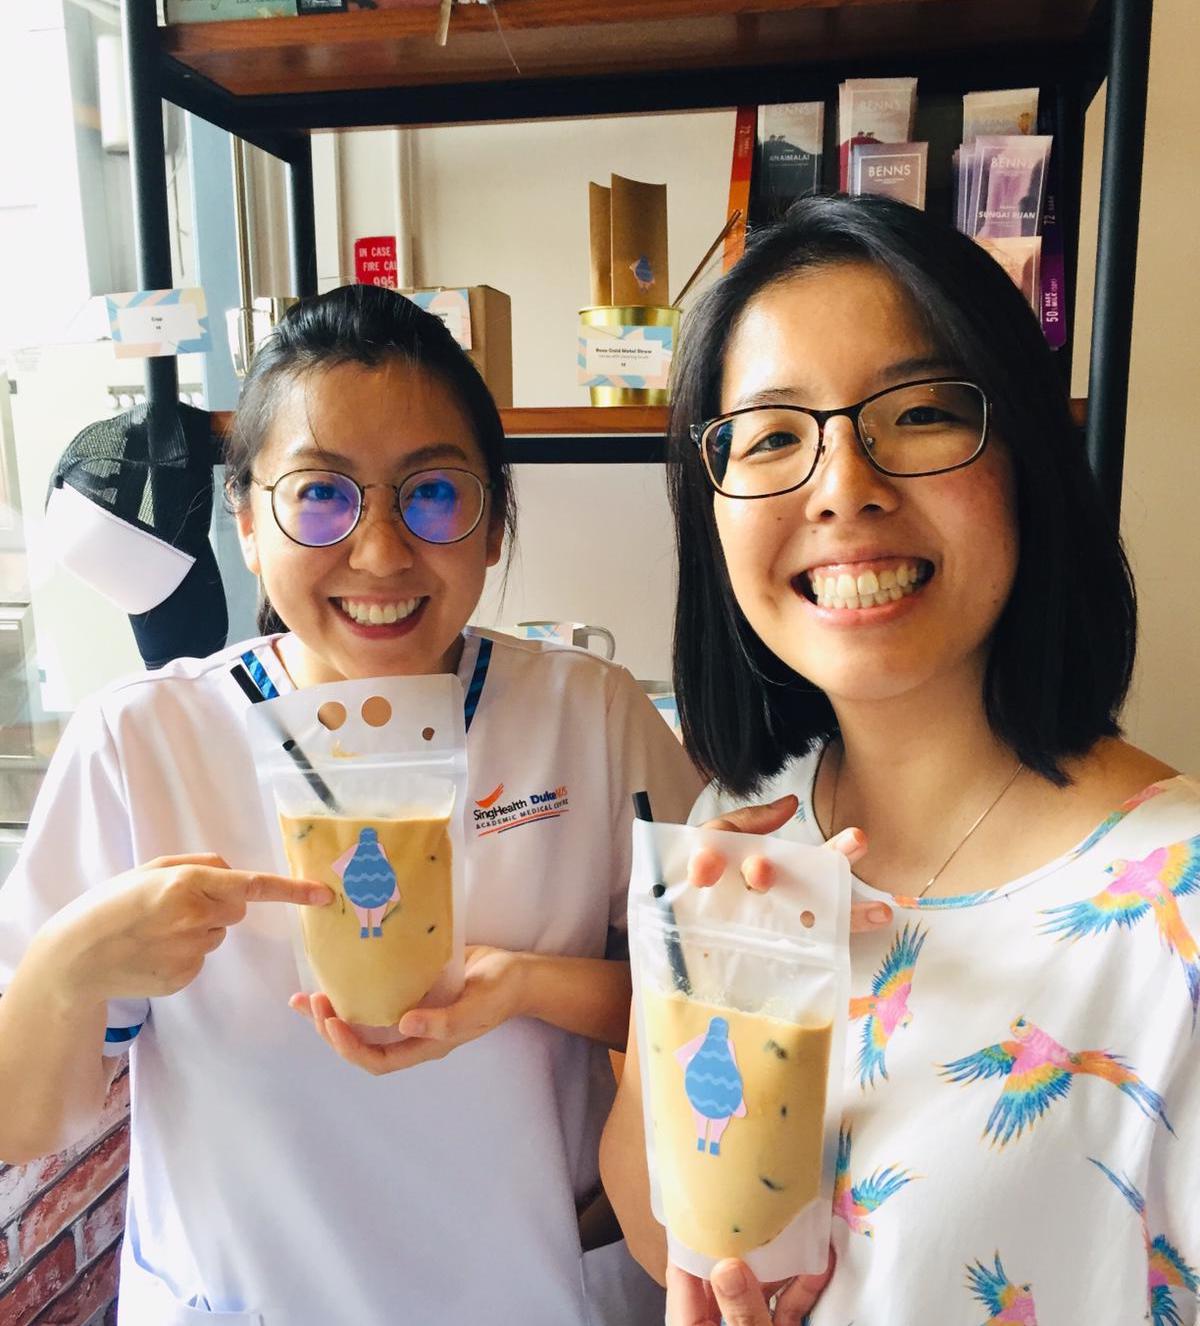 Xinhui (left) might still be relatively inexperienced in palliative care, however, she knows that even though the journey ahead will not be easy, God has shown Himself faithful. “Good or bad or tough, God brought me to it, so He will bring me through it.” (Photo courtesy of Xinhui Ng)